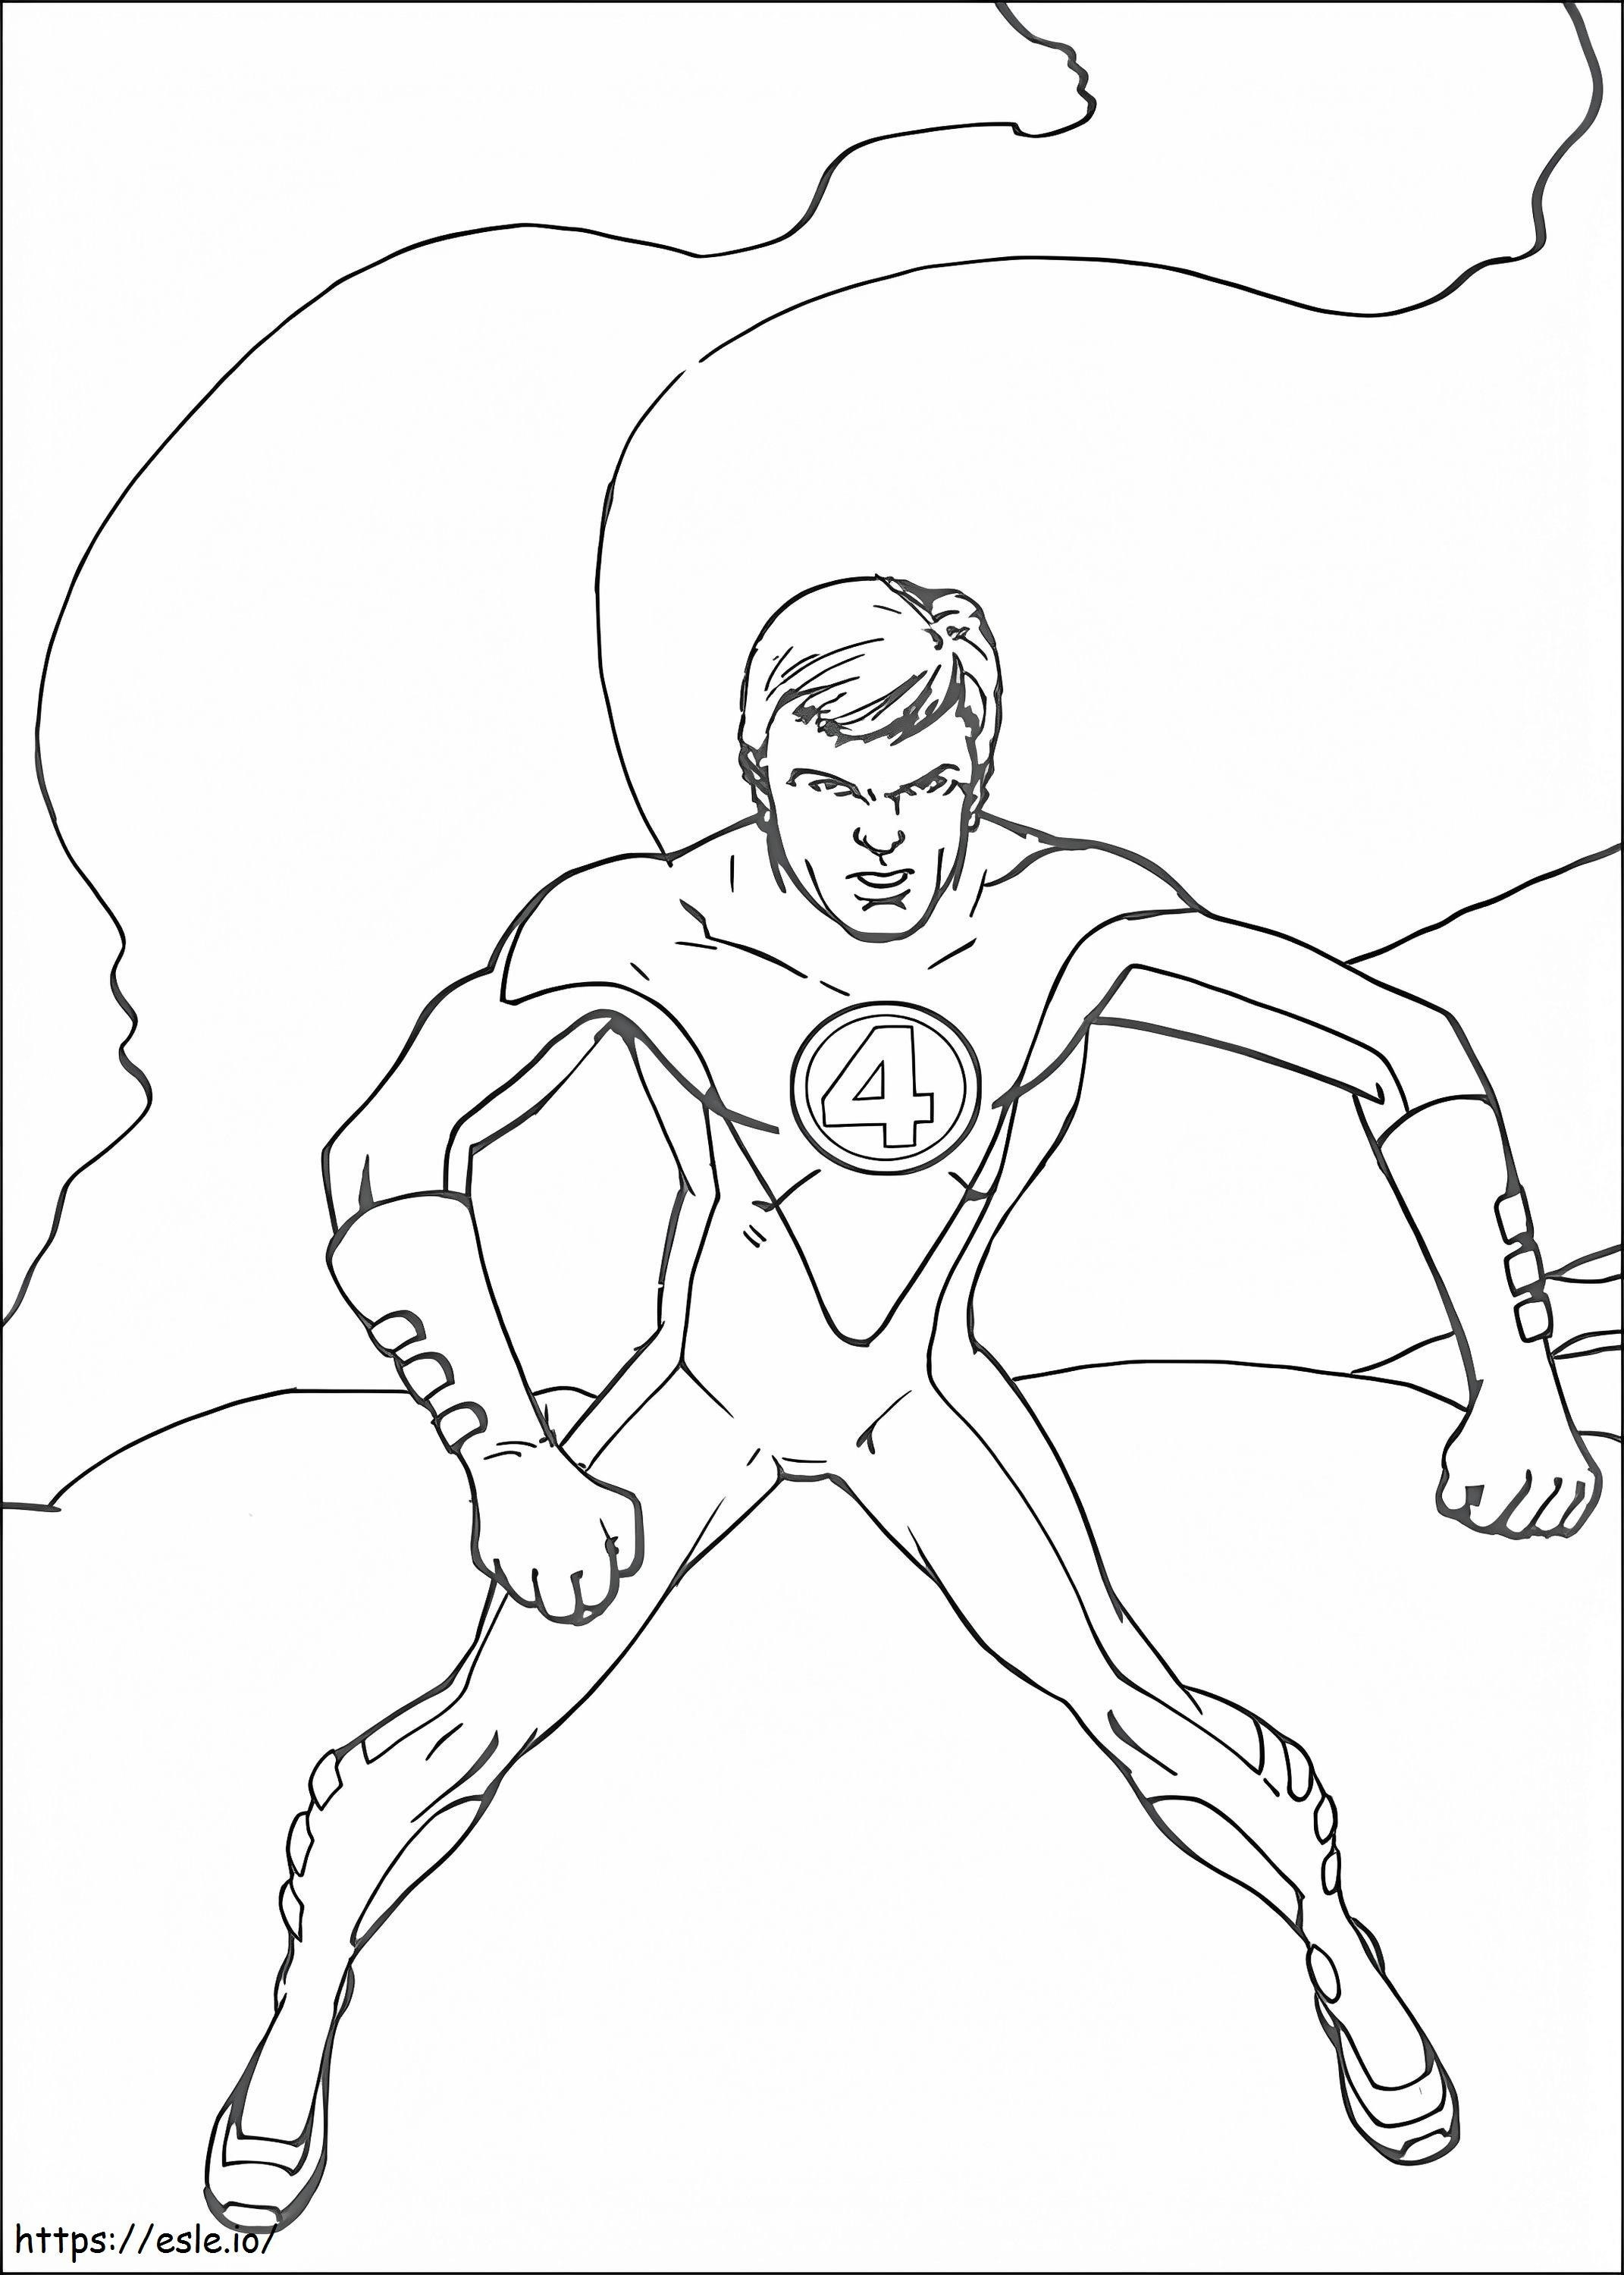 Mister Fantastic 1 coloring page